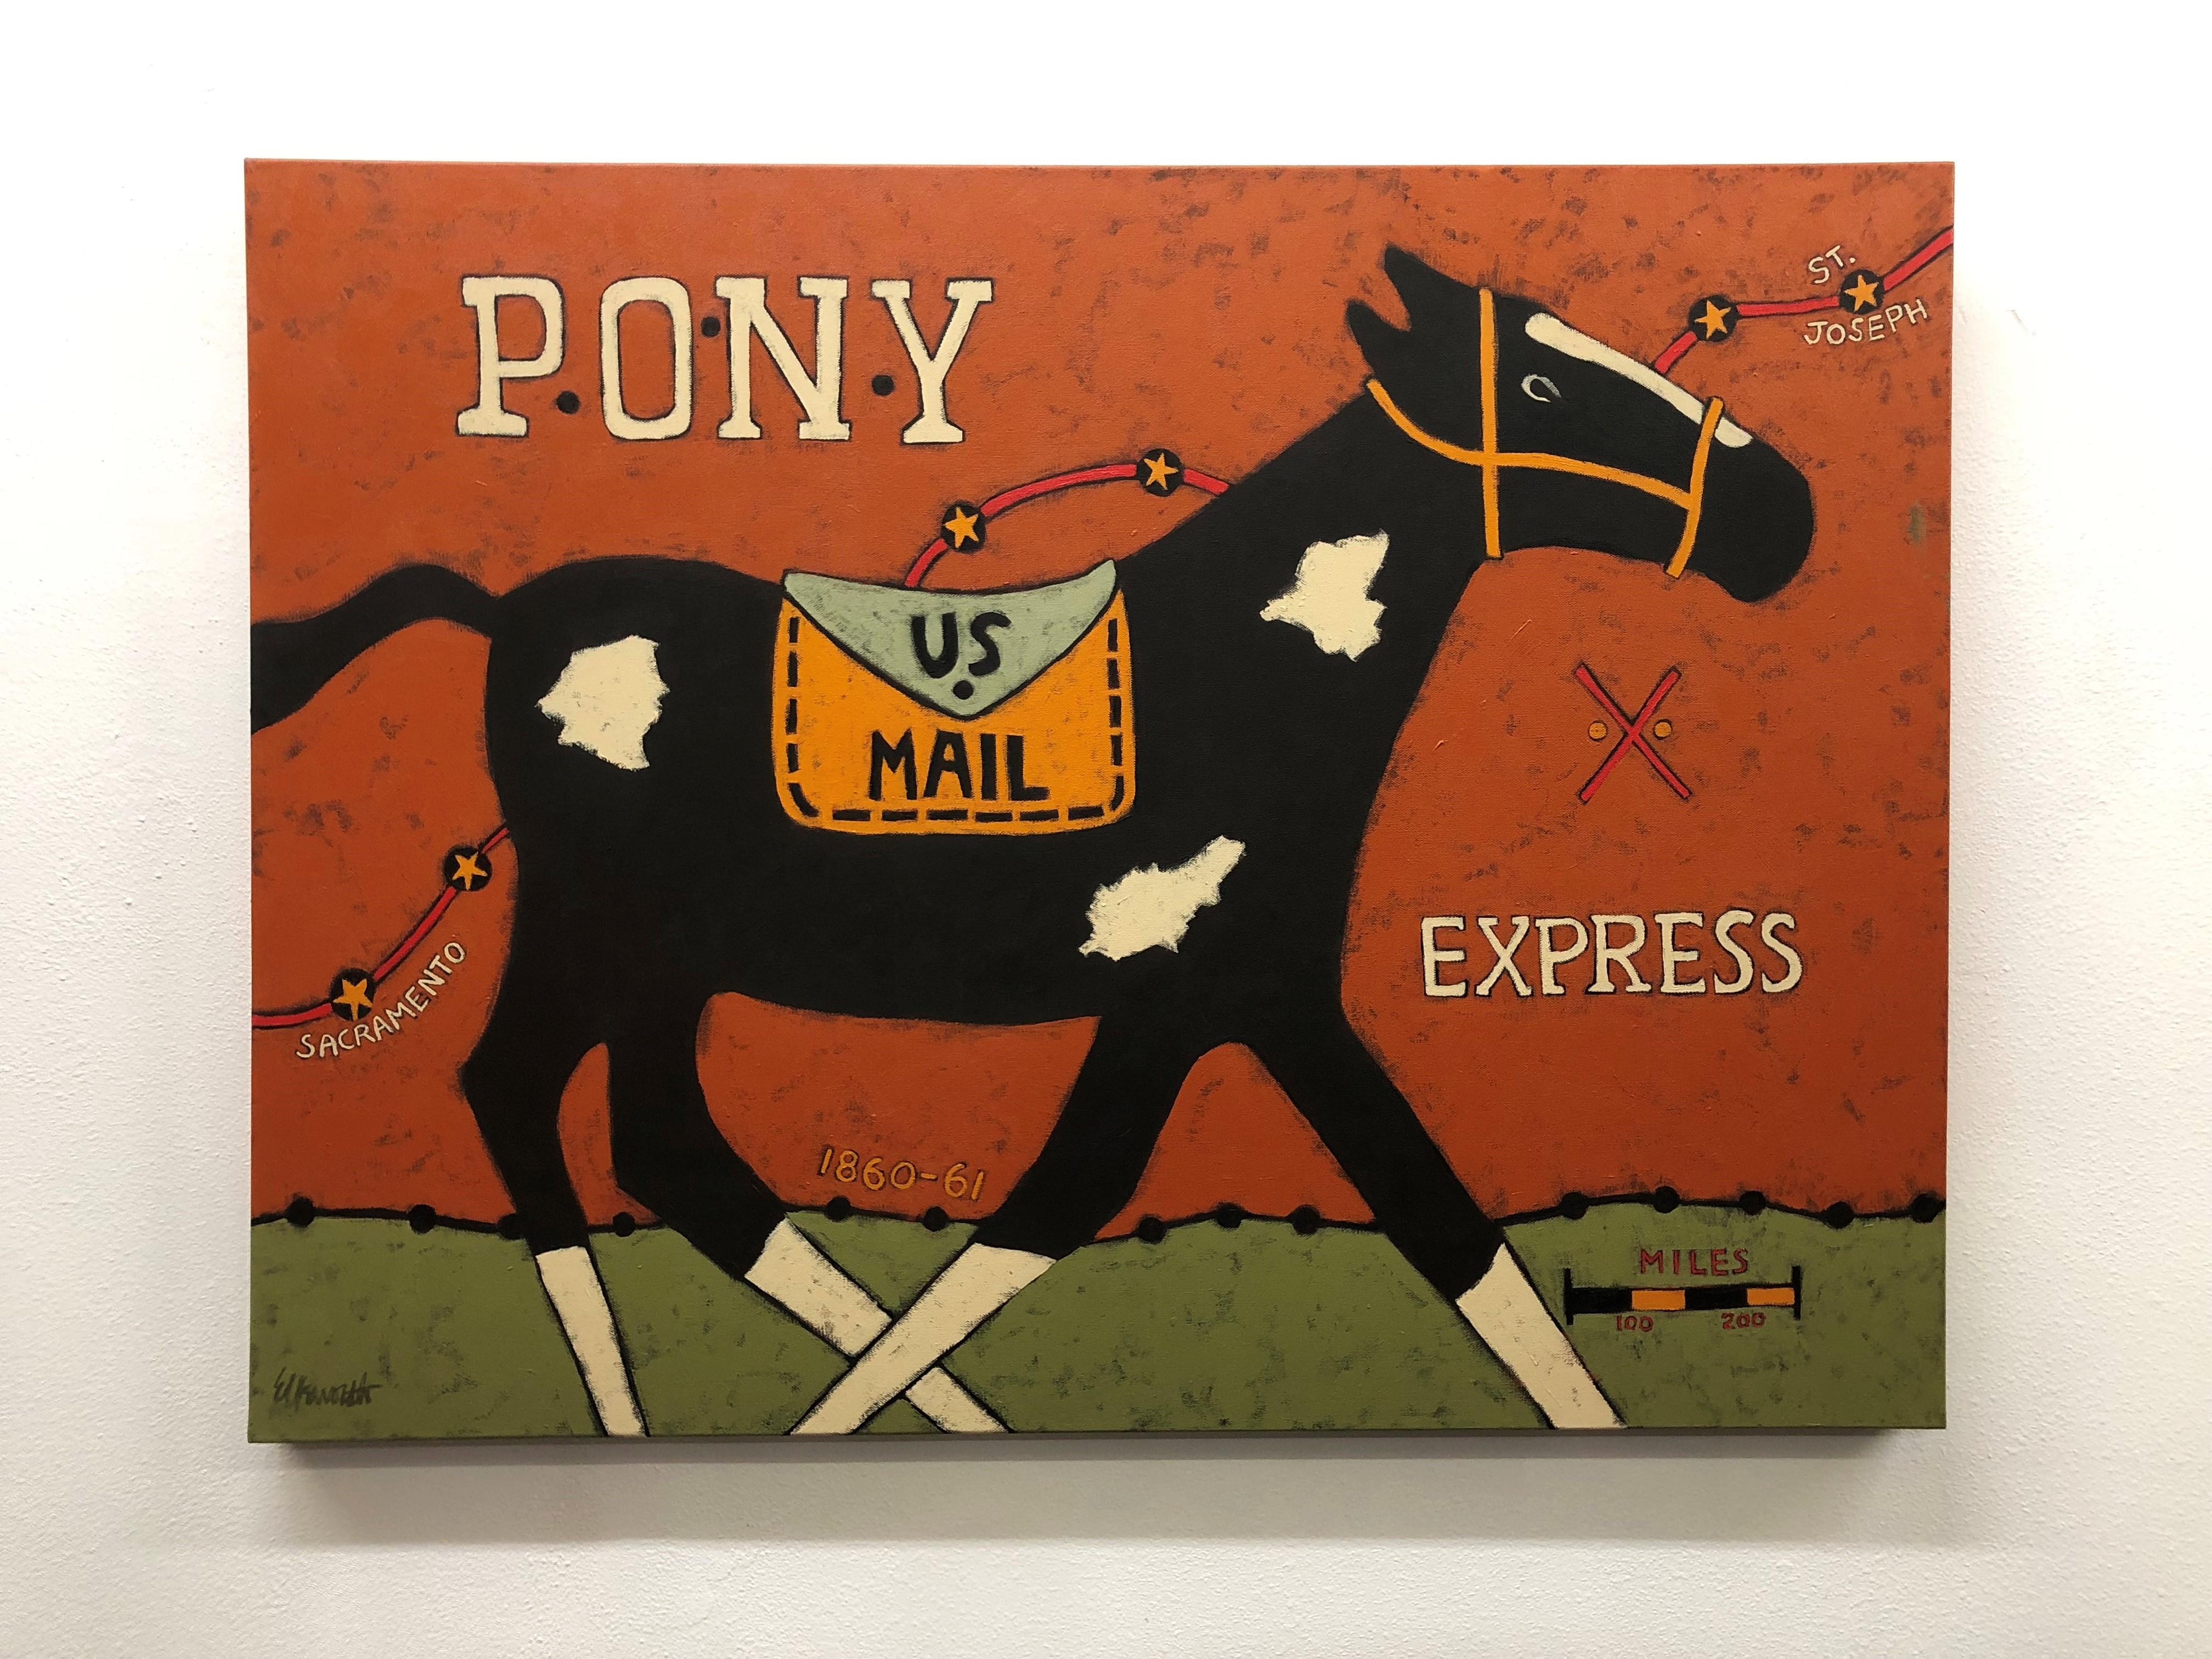 <p>Artist Comments<br>A black horse with white spots gallops with all its might, following the outlined route in the background. The painting carries a whimsical tone with its colors and primitive lines. It celebrates the Pony Express and its